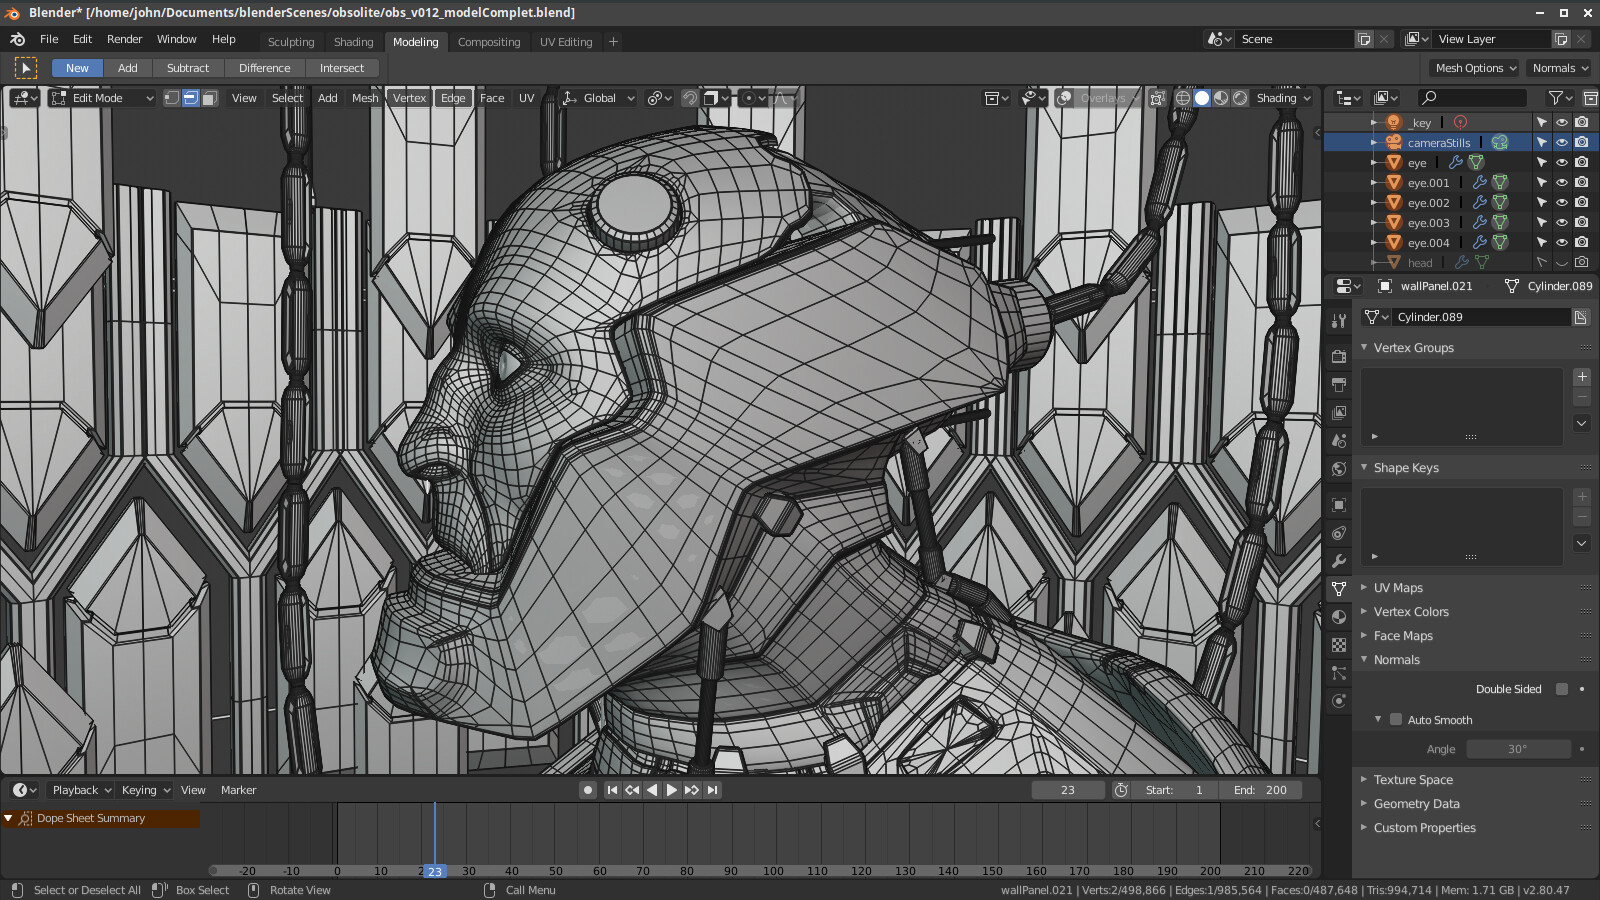 More wireframe